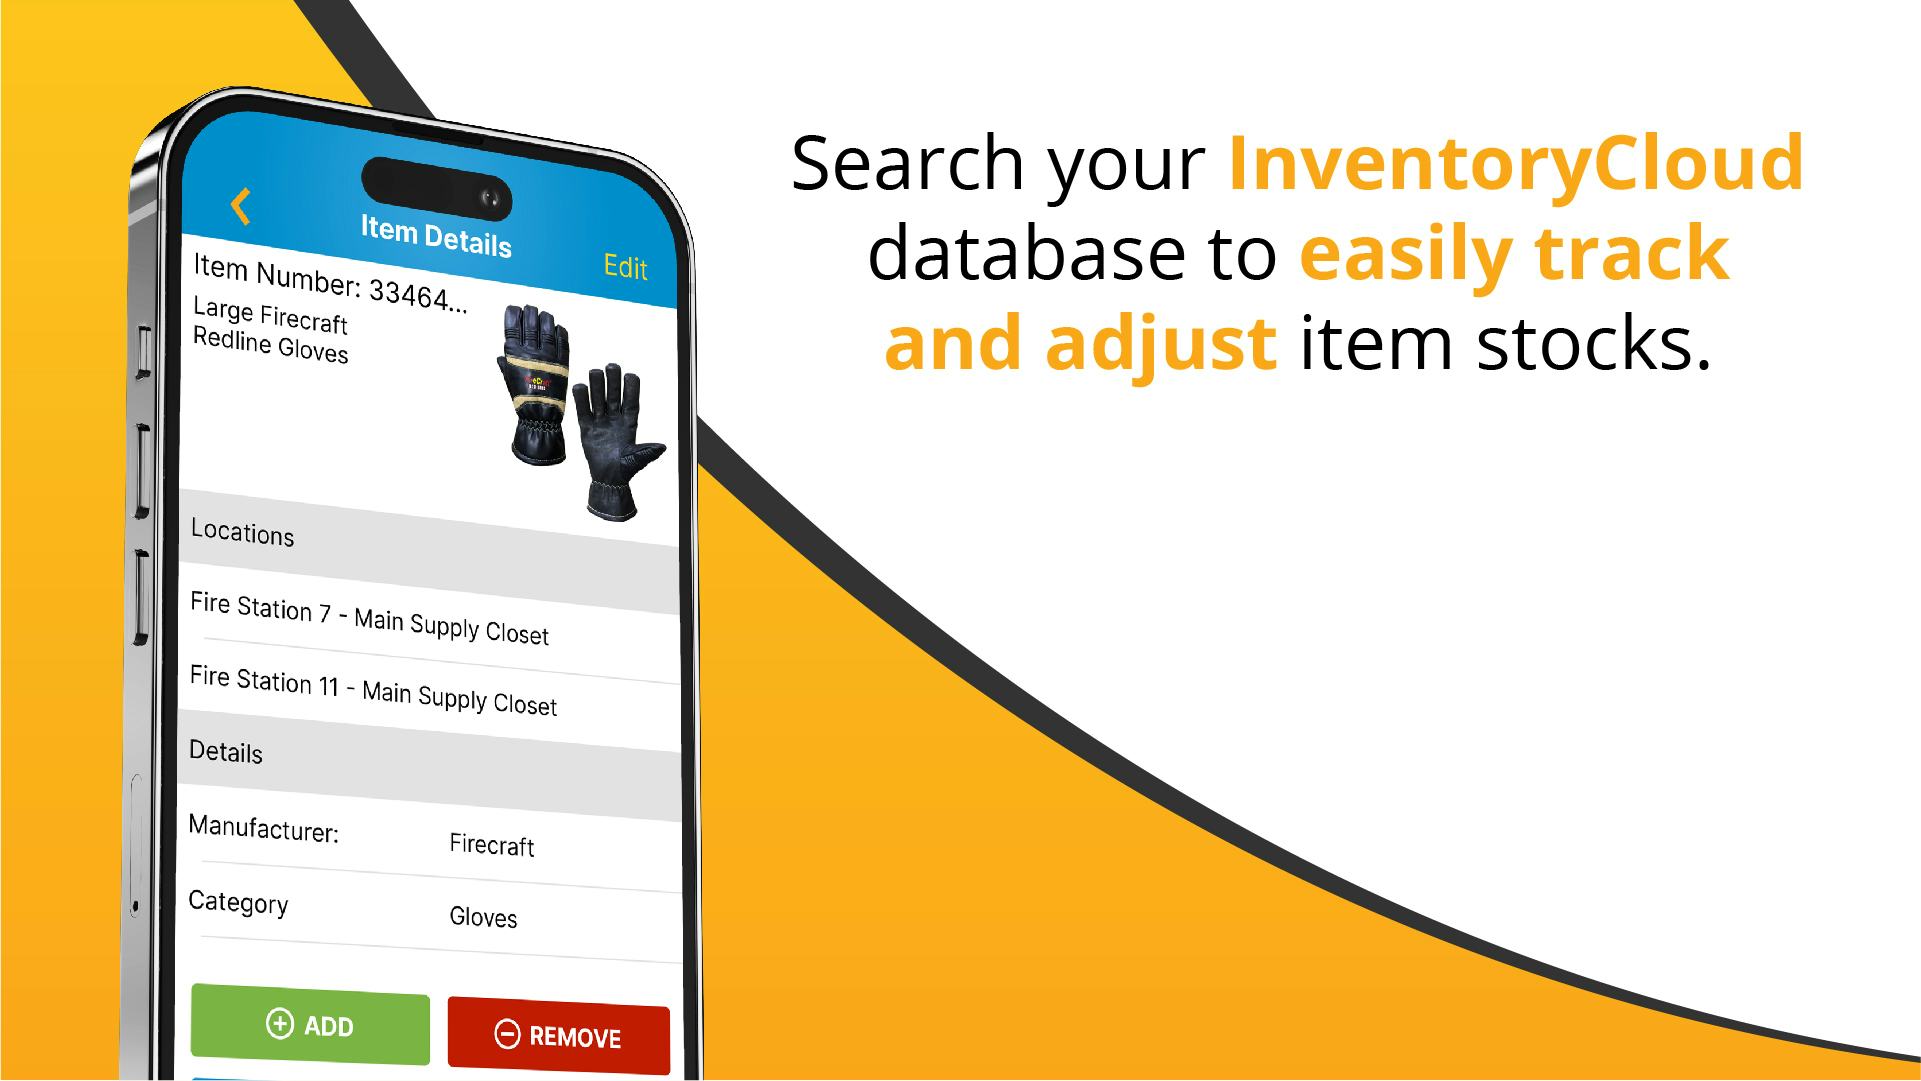 InventoryCloud Software - Search your InventoryCloud database to easily track and adjust item stocks.